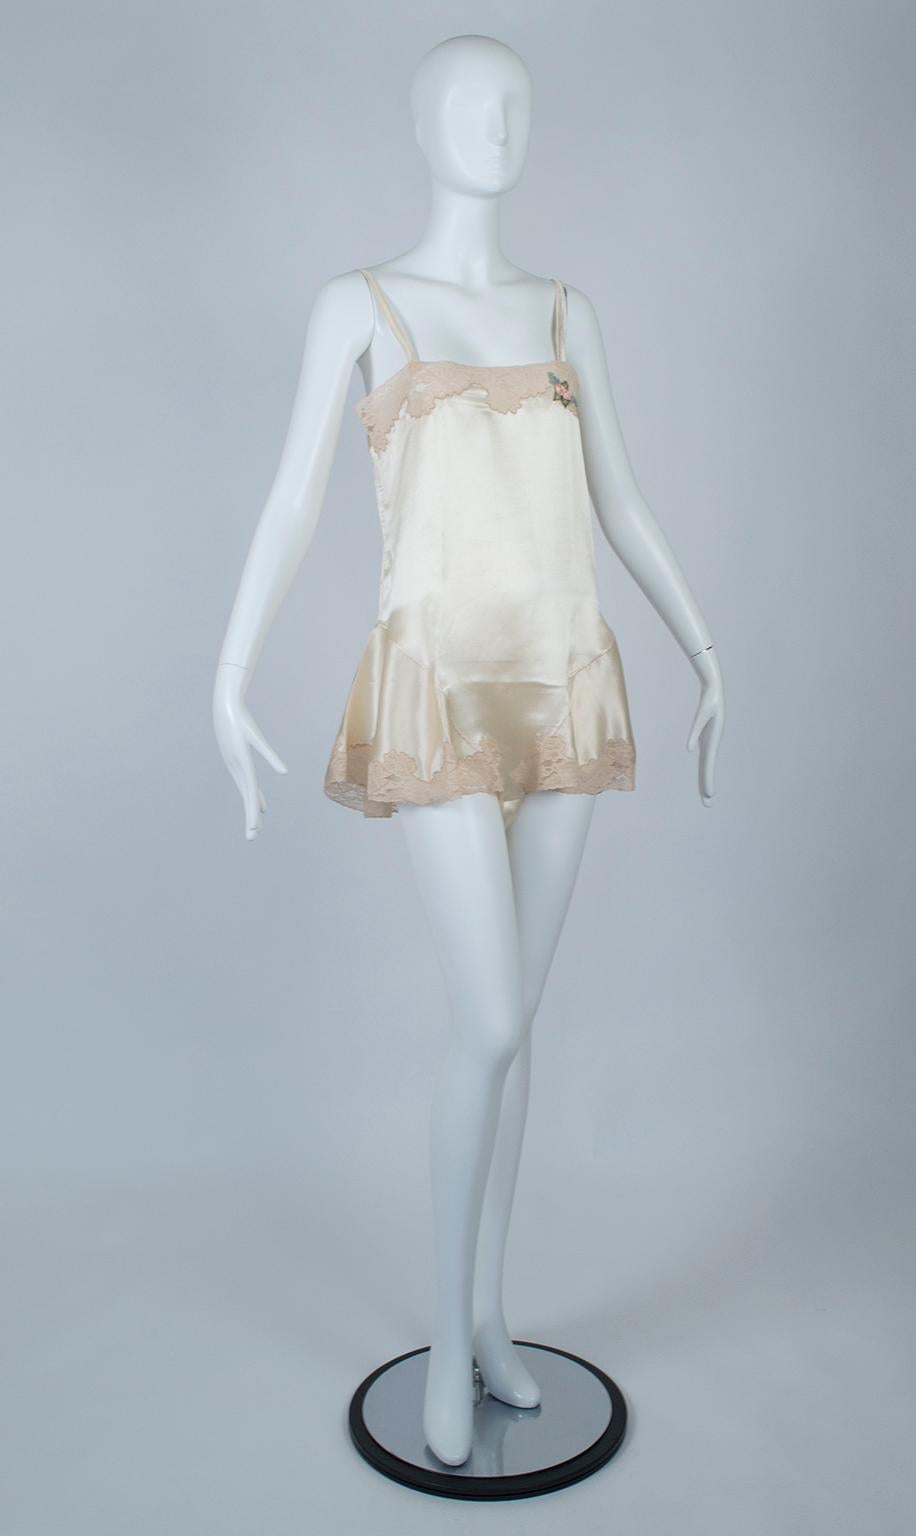 Though it looks and wears like a negligée, this wisp of a garment was an intermediate step between the chemise-style undergarments of the Victorian era and the separate bra and panties we wear today. Called “step-ins”, they made ideal sleepwear and